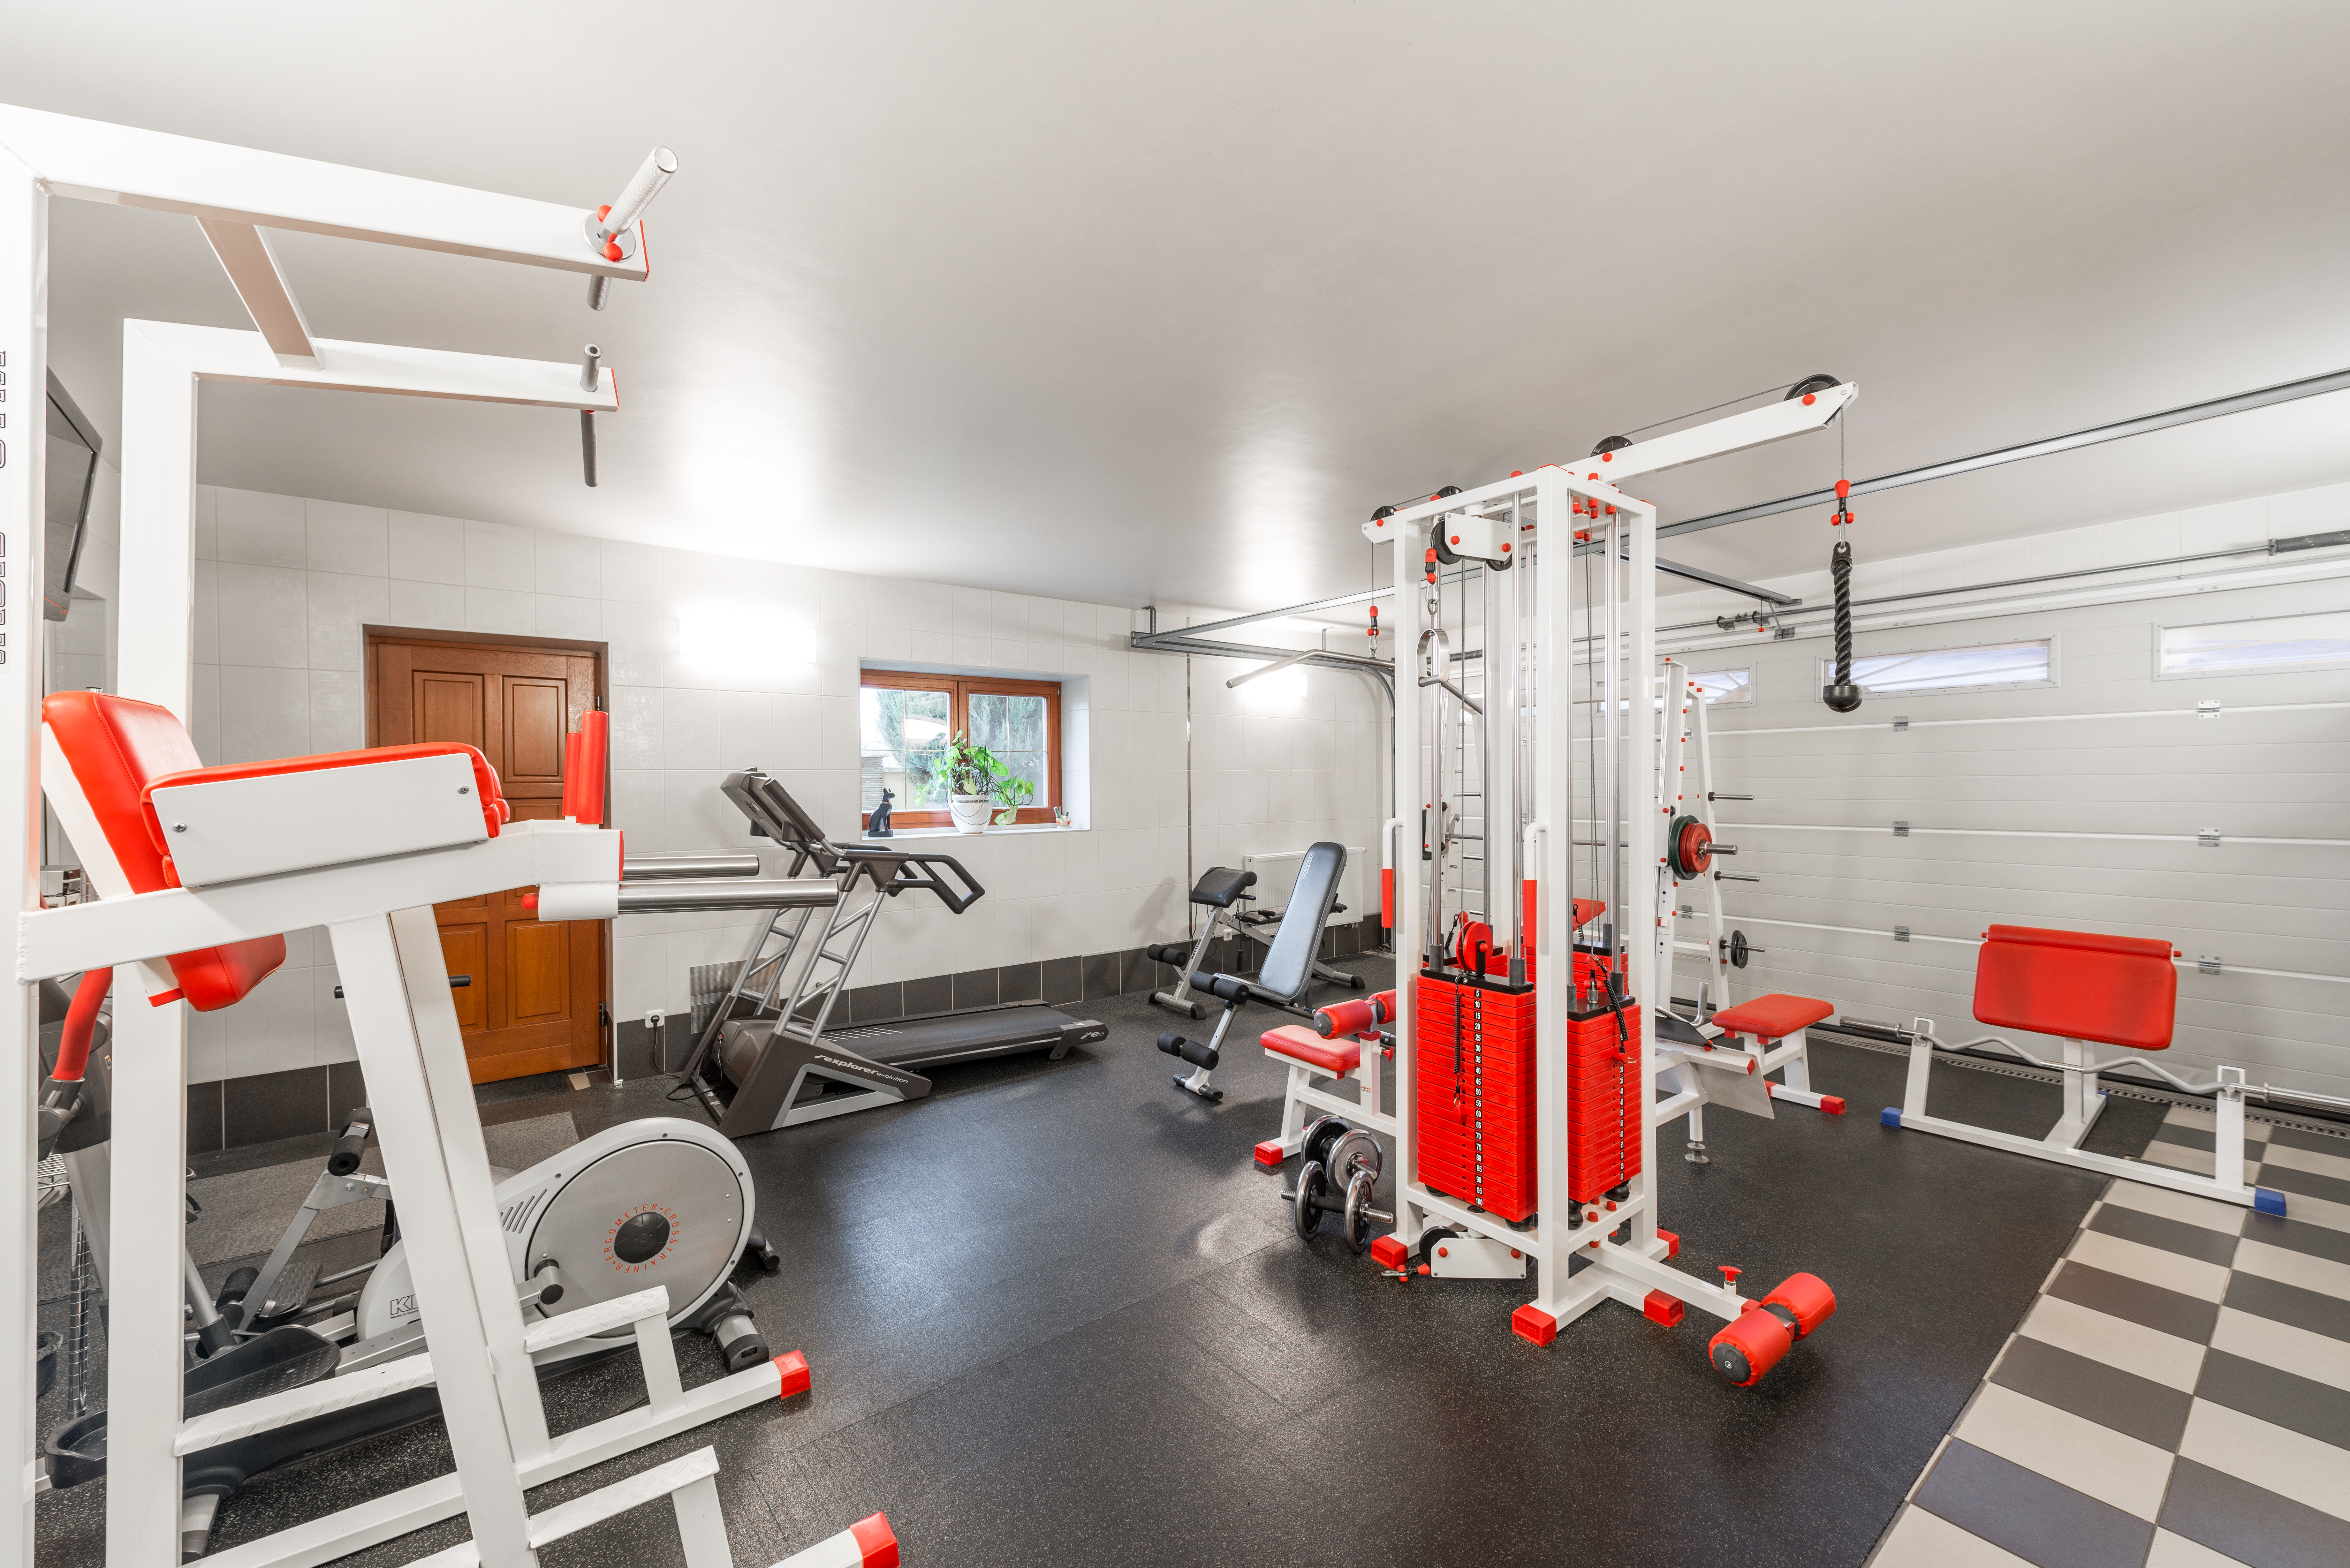 Well-organized and distraction-free home gym